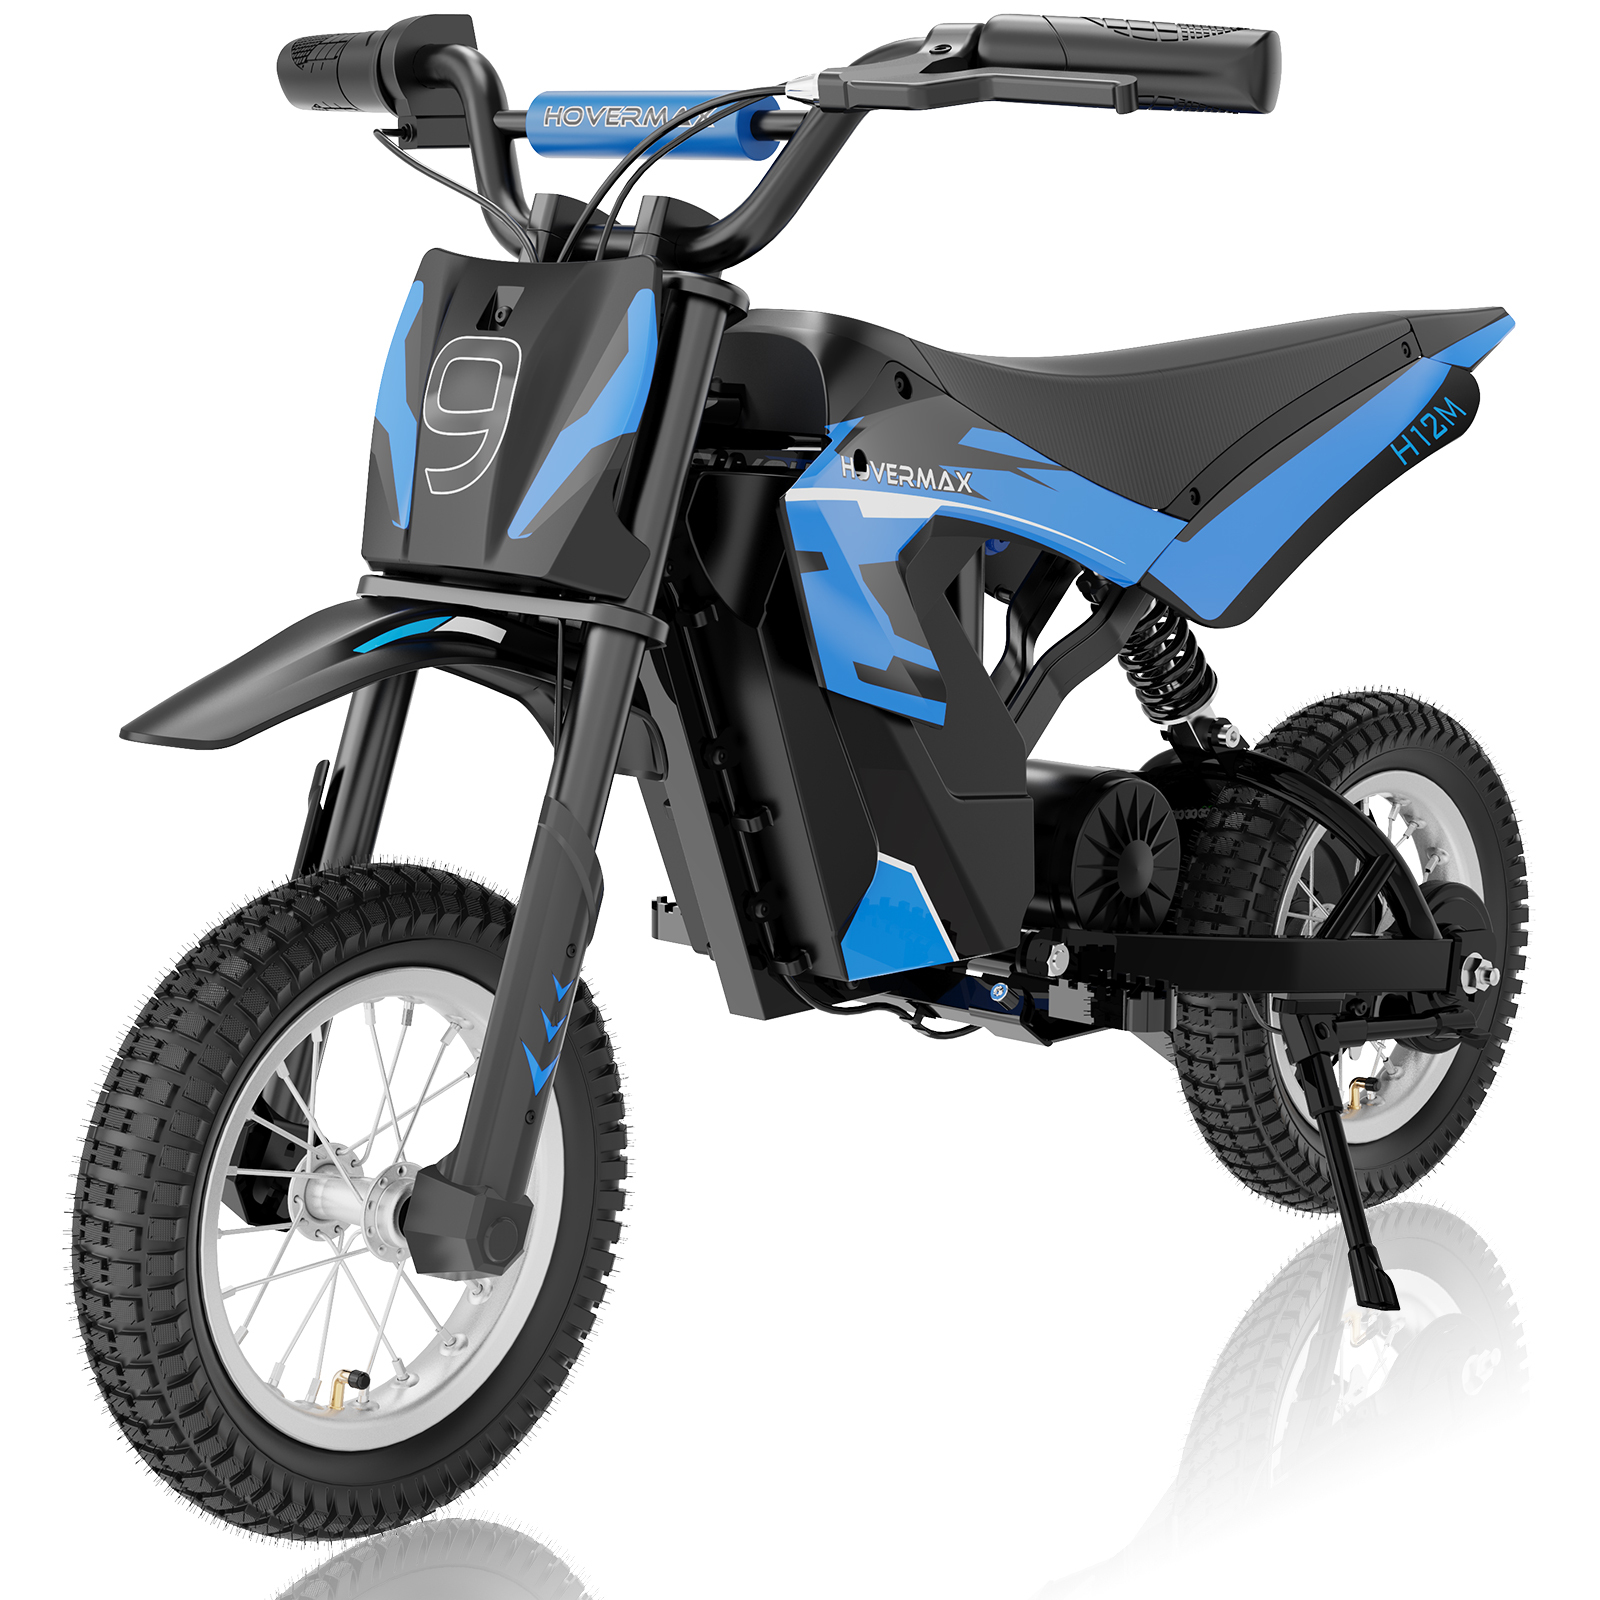 HOVERMAX H12M 24V Electric Dirt Bike, 300W Electric Motorcycle 12.5MPH Max Speed, Ride On Toys motocross for Kids Teens, Blue - image 1 of 8